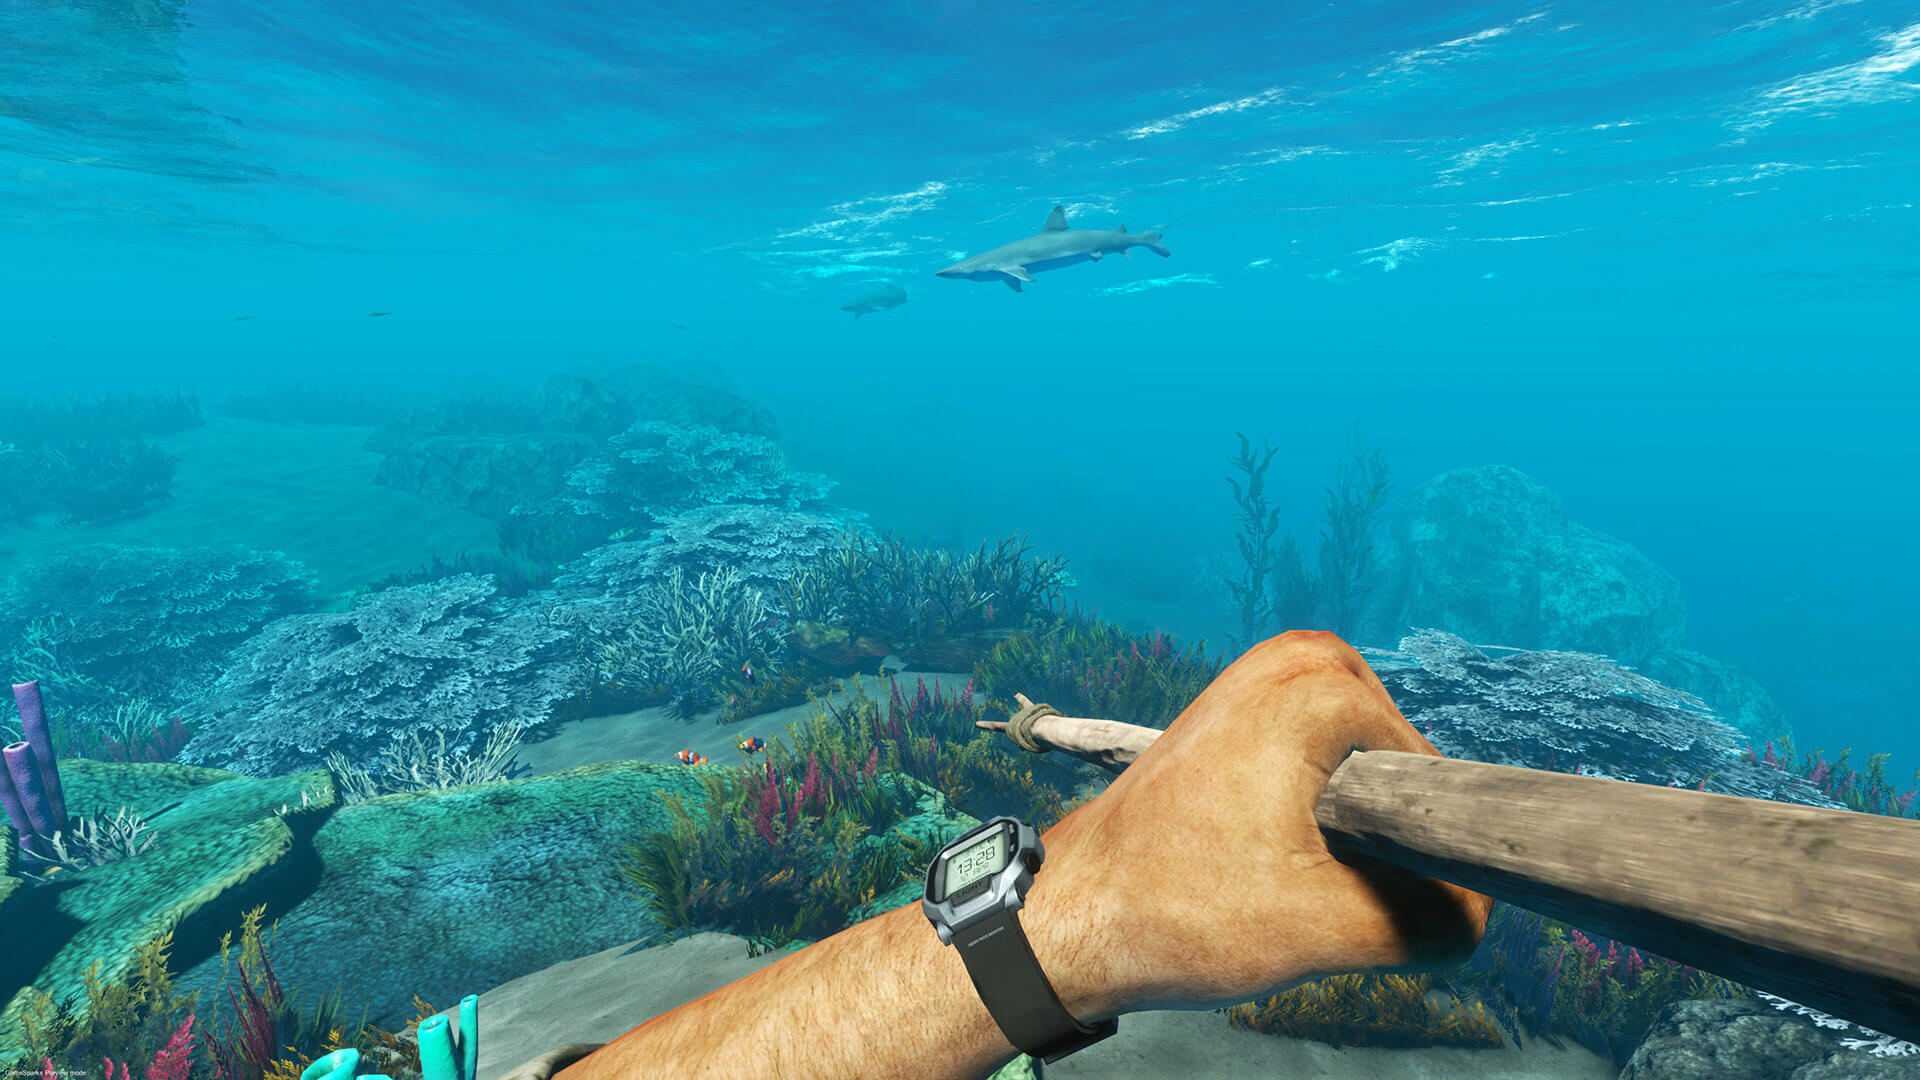 Stranded Deep: the Water World Routine - PlayLab! Magazine